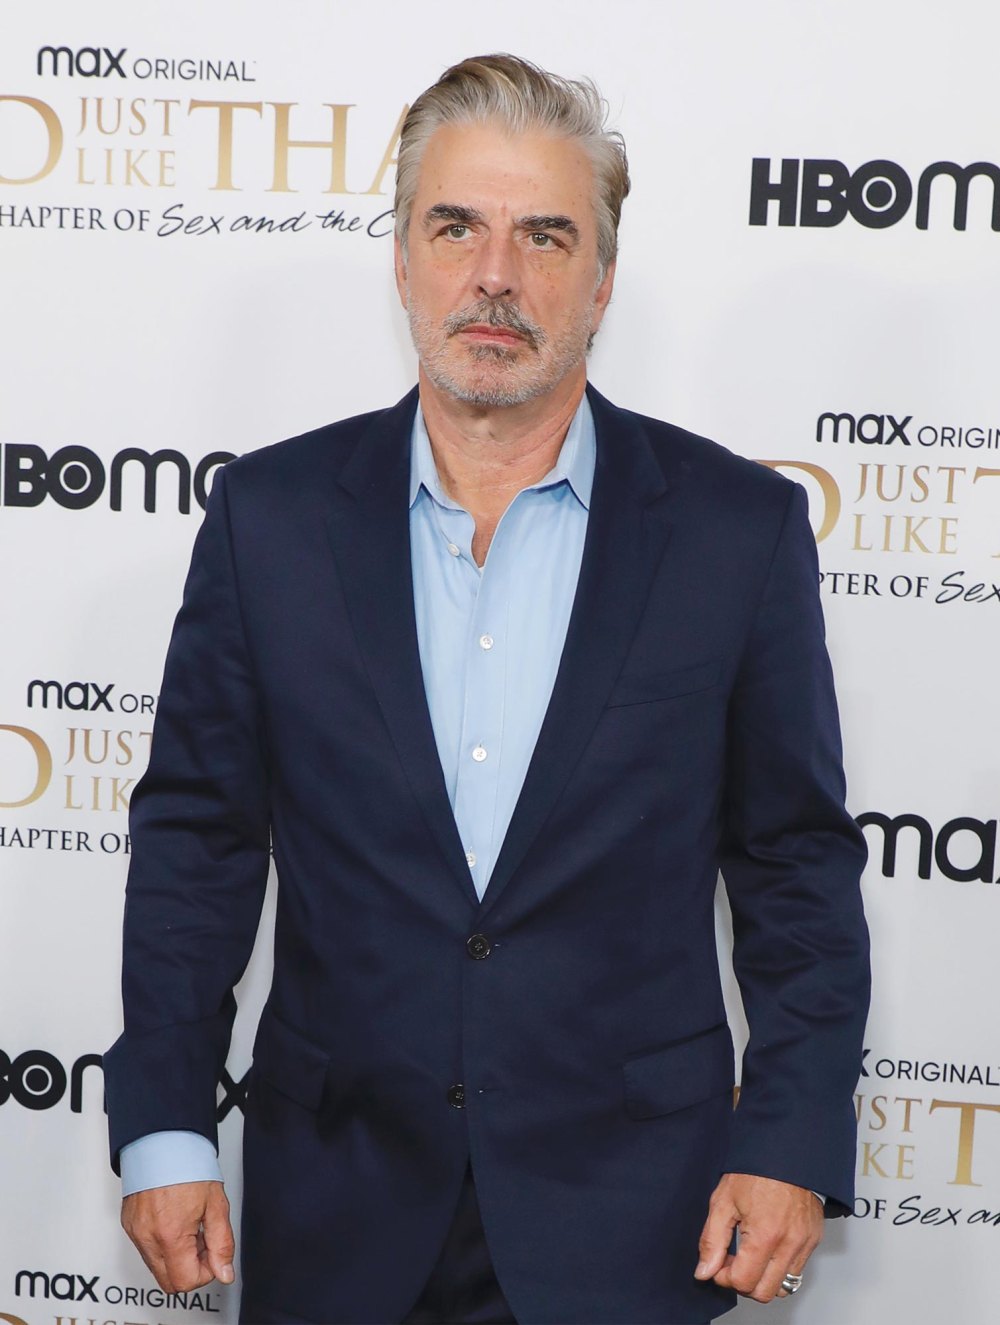 Chris Noth Breaks Silence on Sexual Assault Allegations Plans to Persevere in His Career 308